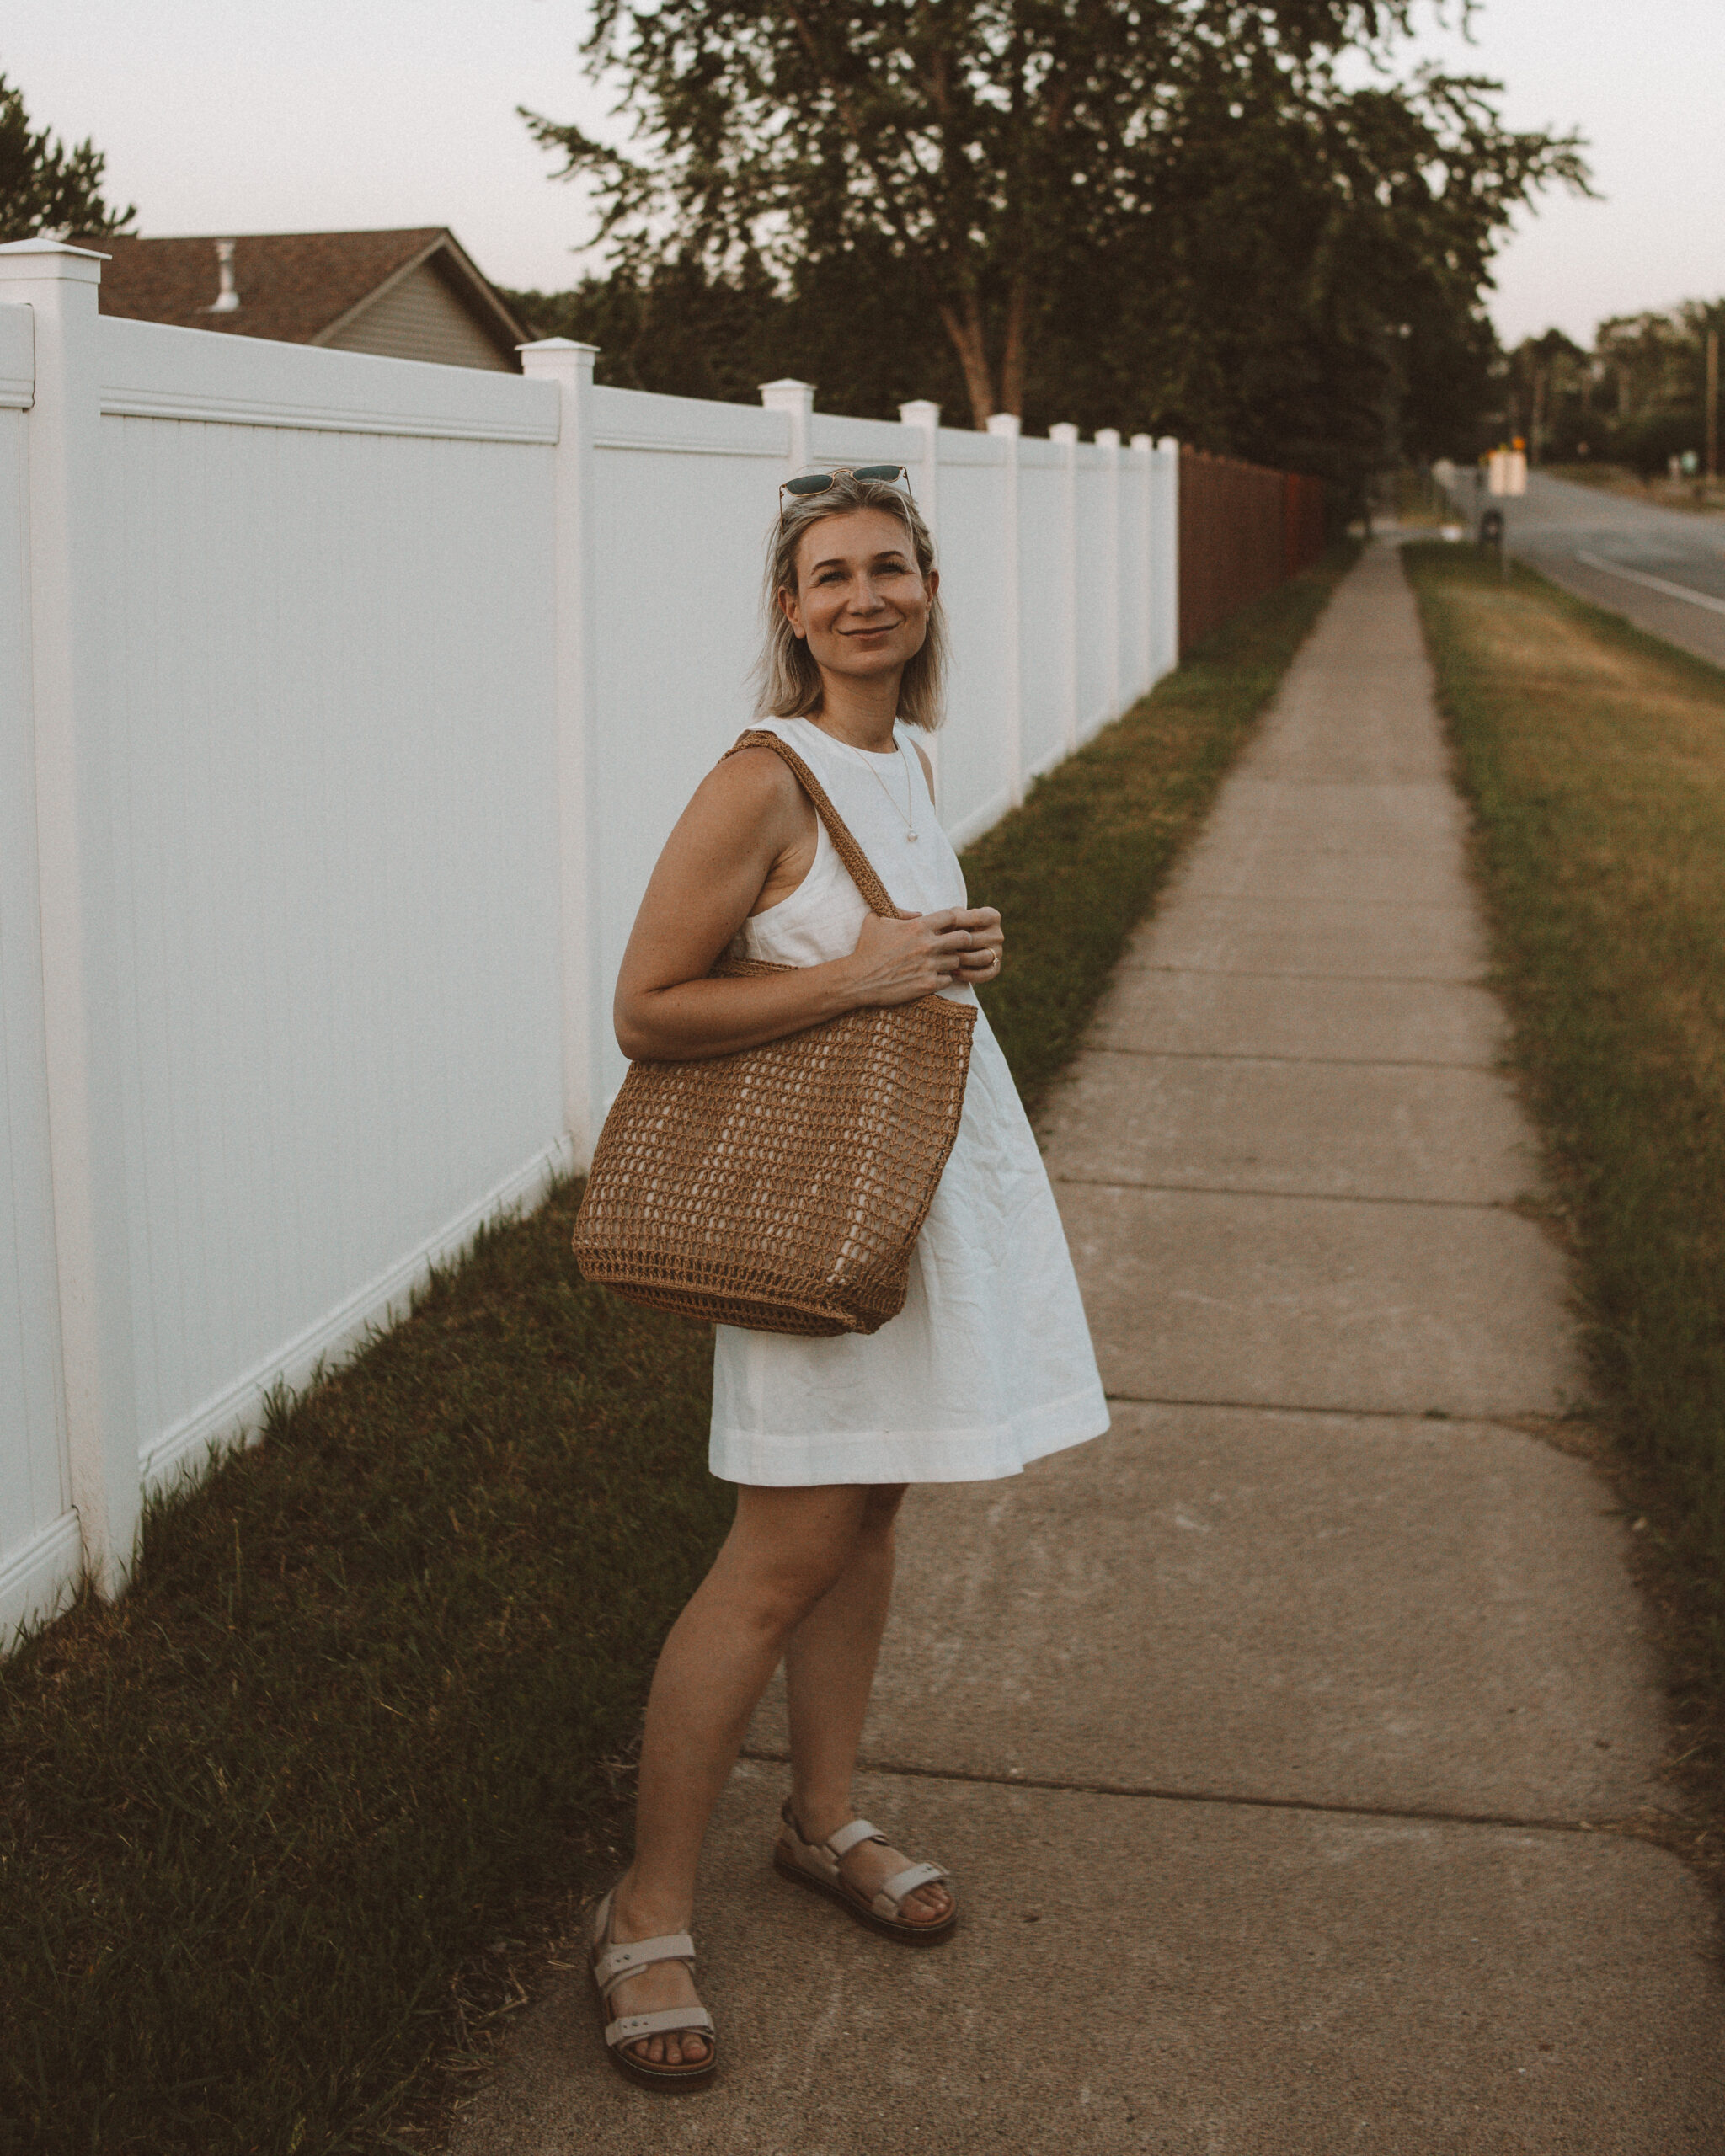 Karin Emily wears one of her favorite hot weather staples - a little white linen dress 